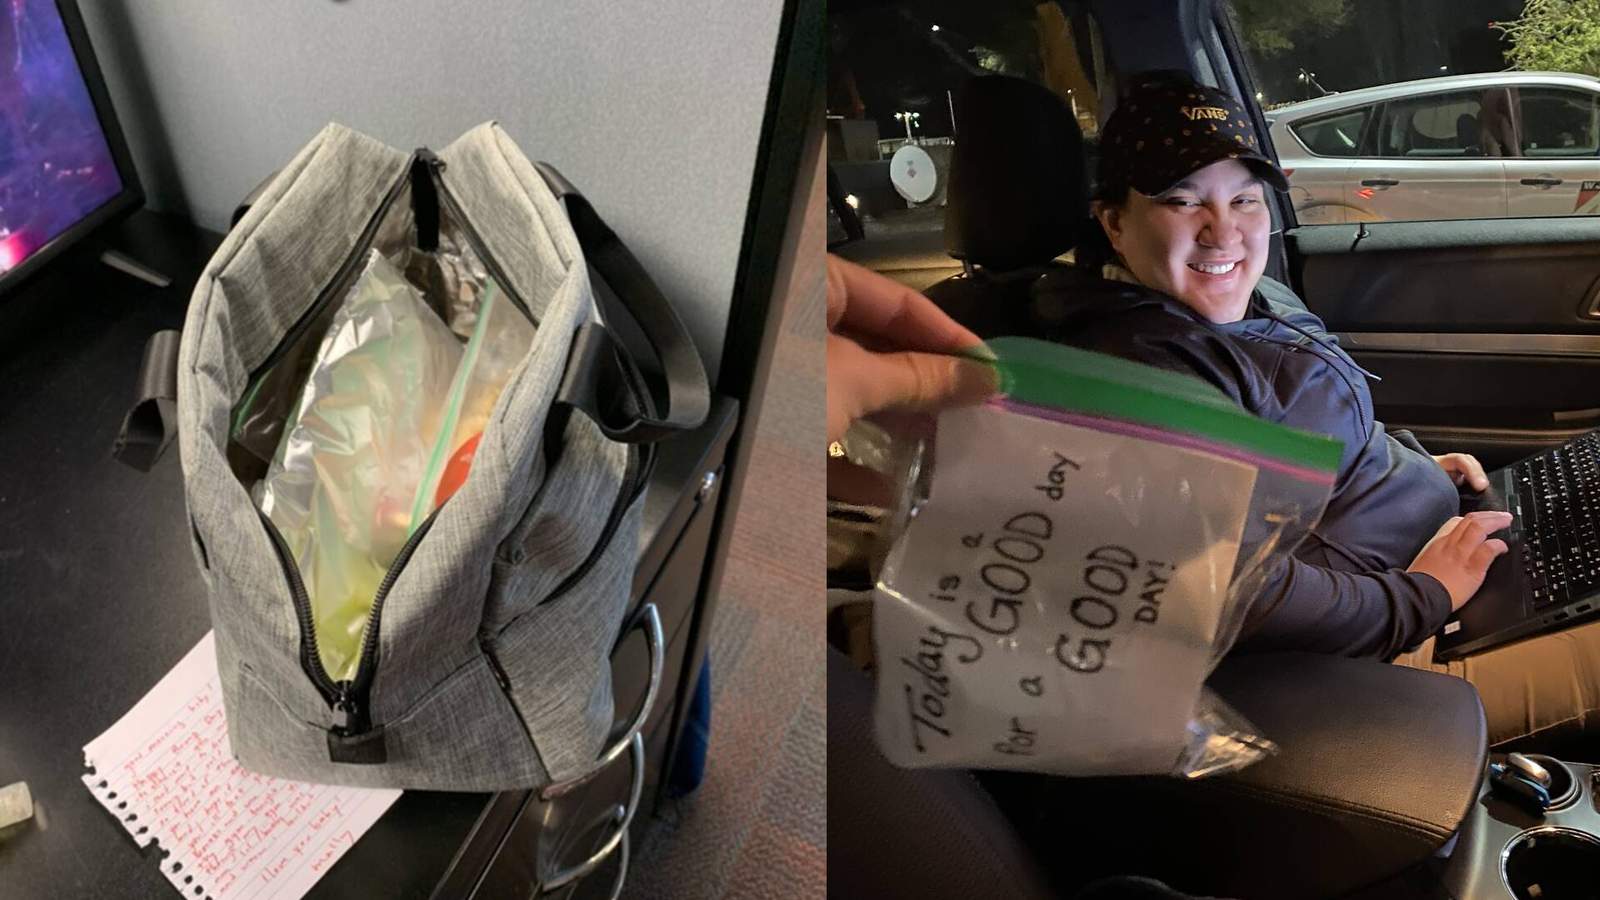 Here are some of our favorite Random Jax of Kindness